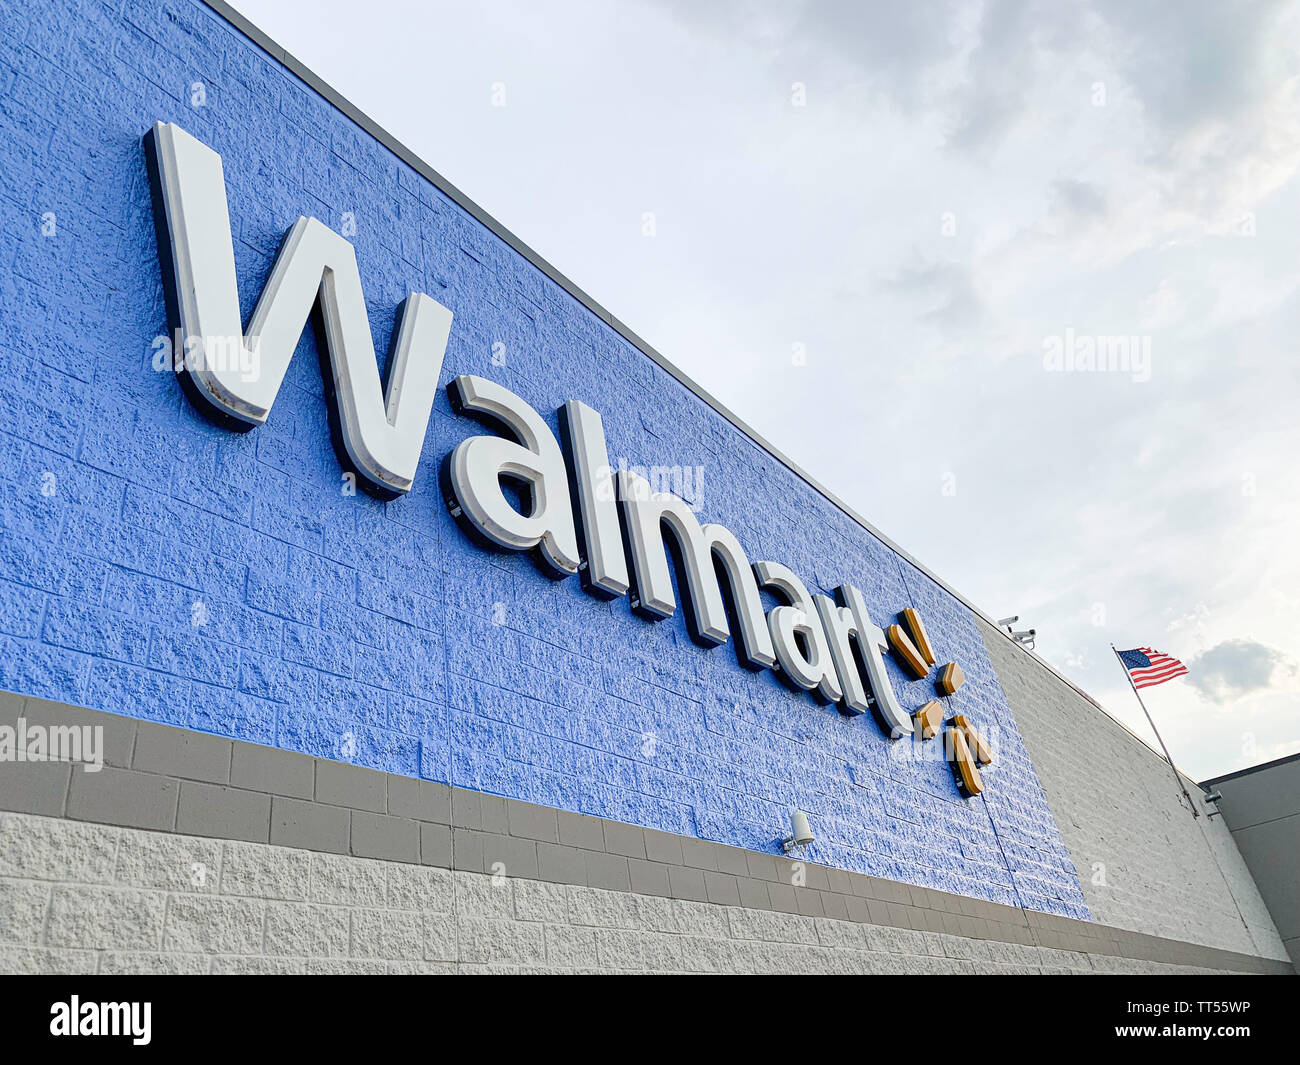 The prominent lighted 3D plastic sign of the Walmart Superstore located in Vidalia, Georgia, USA, is featured on the facade. Stock Photo